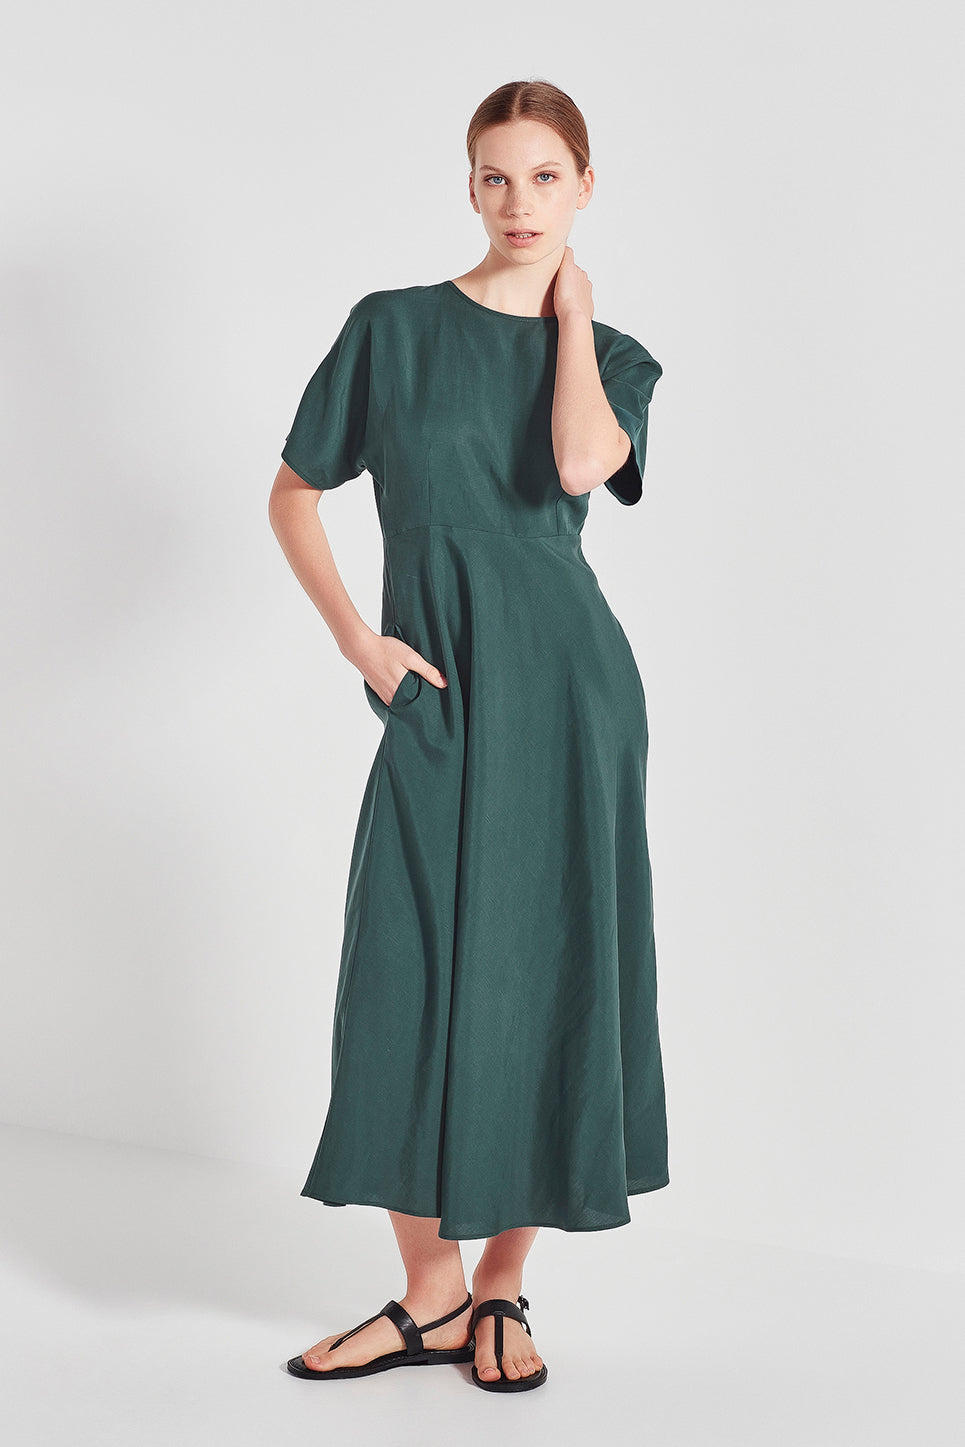 The Evelyn 2-Way Dress in Bottle Green